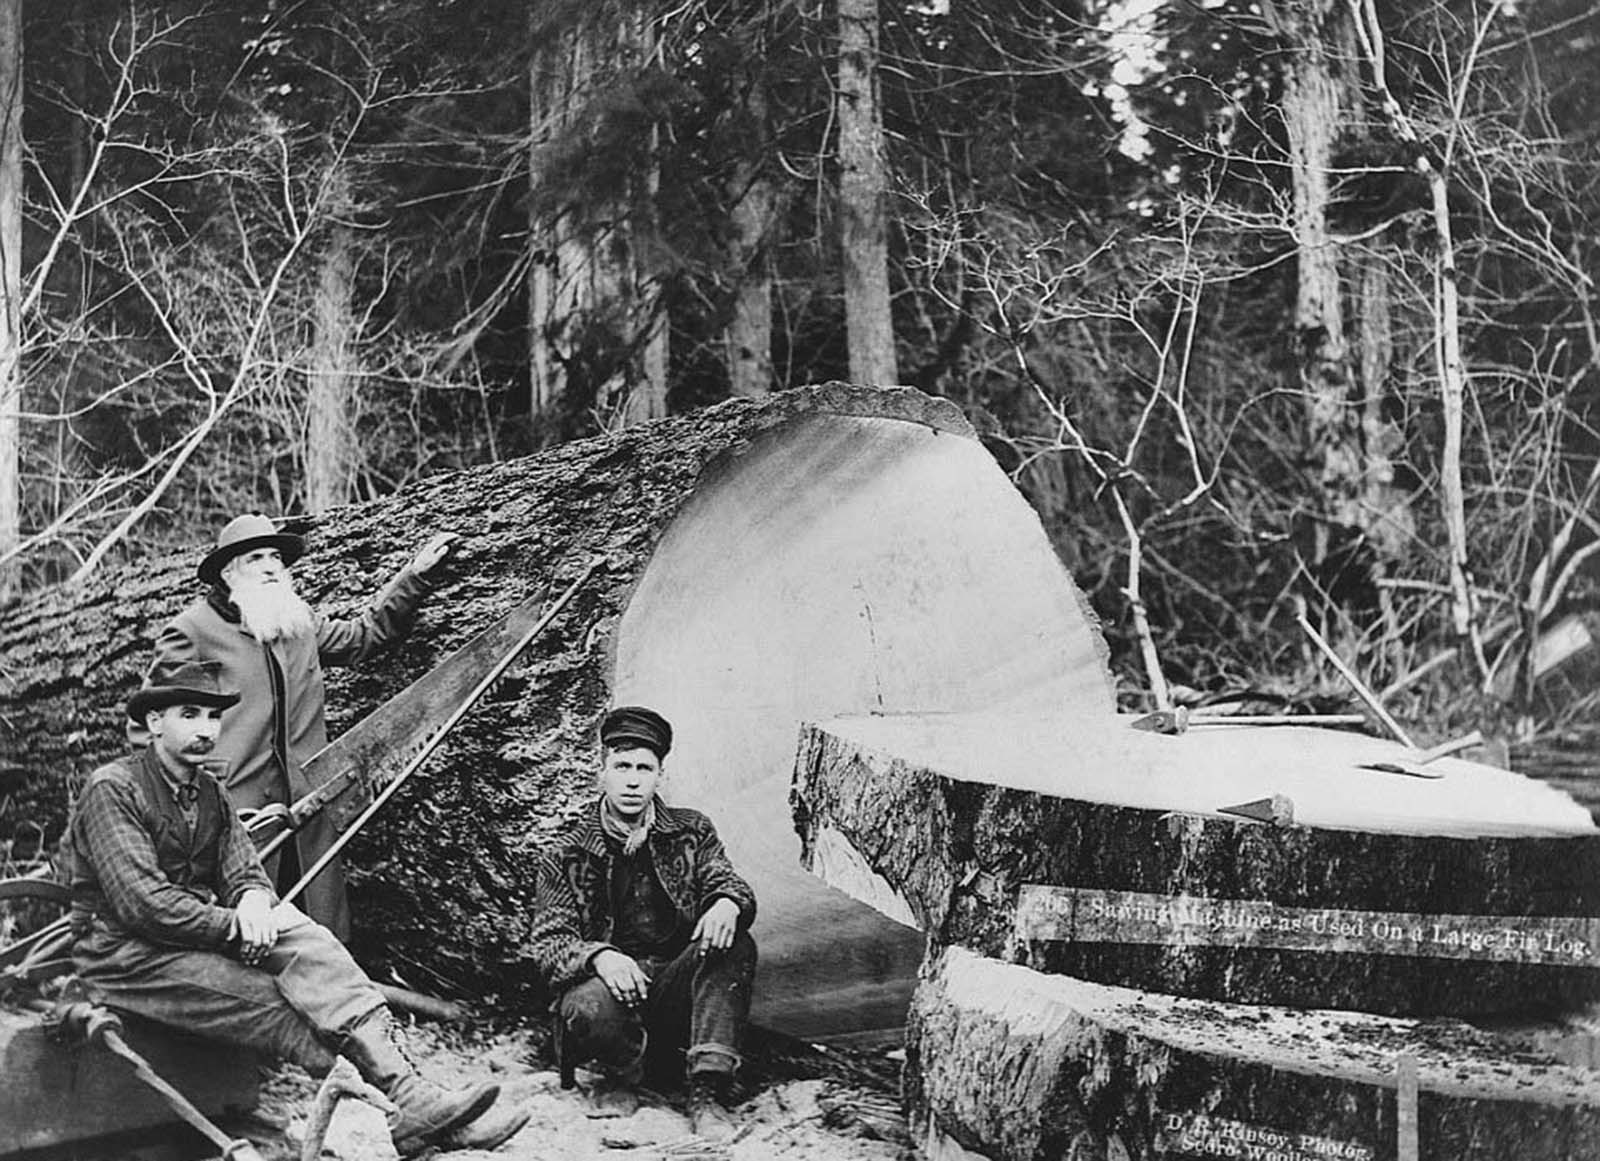 Three lumberjacks in 1900 stand next to a large fir log which has been cut using a sawing machine in Sedro-Woolley, Washington